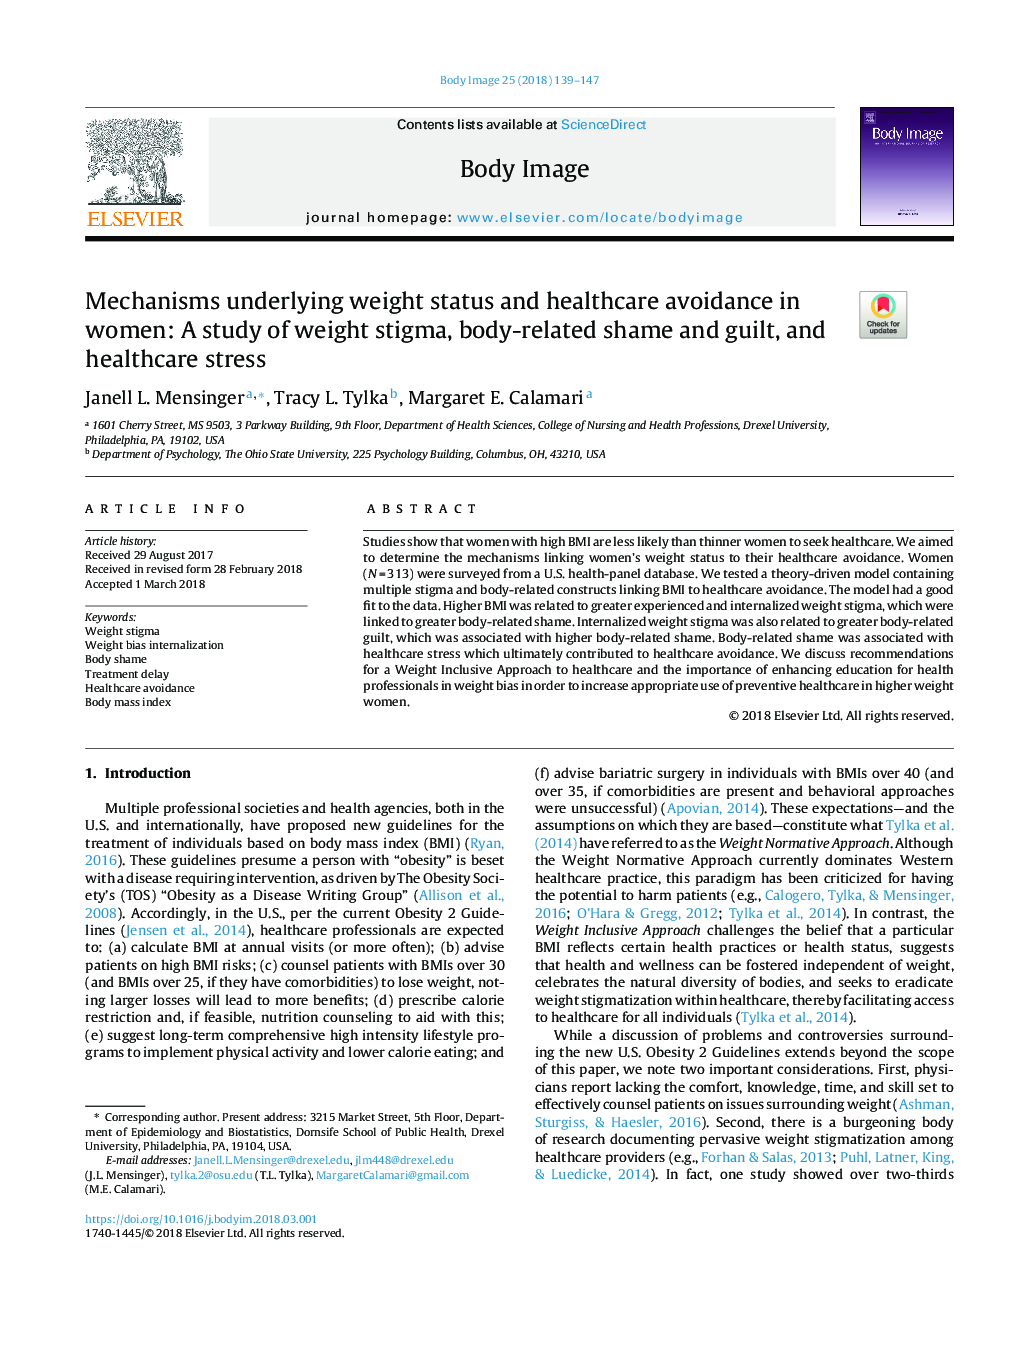 Mechanisms underlying weight status and healthcare avoidance in women: A study of weight stigma, body-related shame and guilt, and healthcare stress